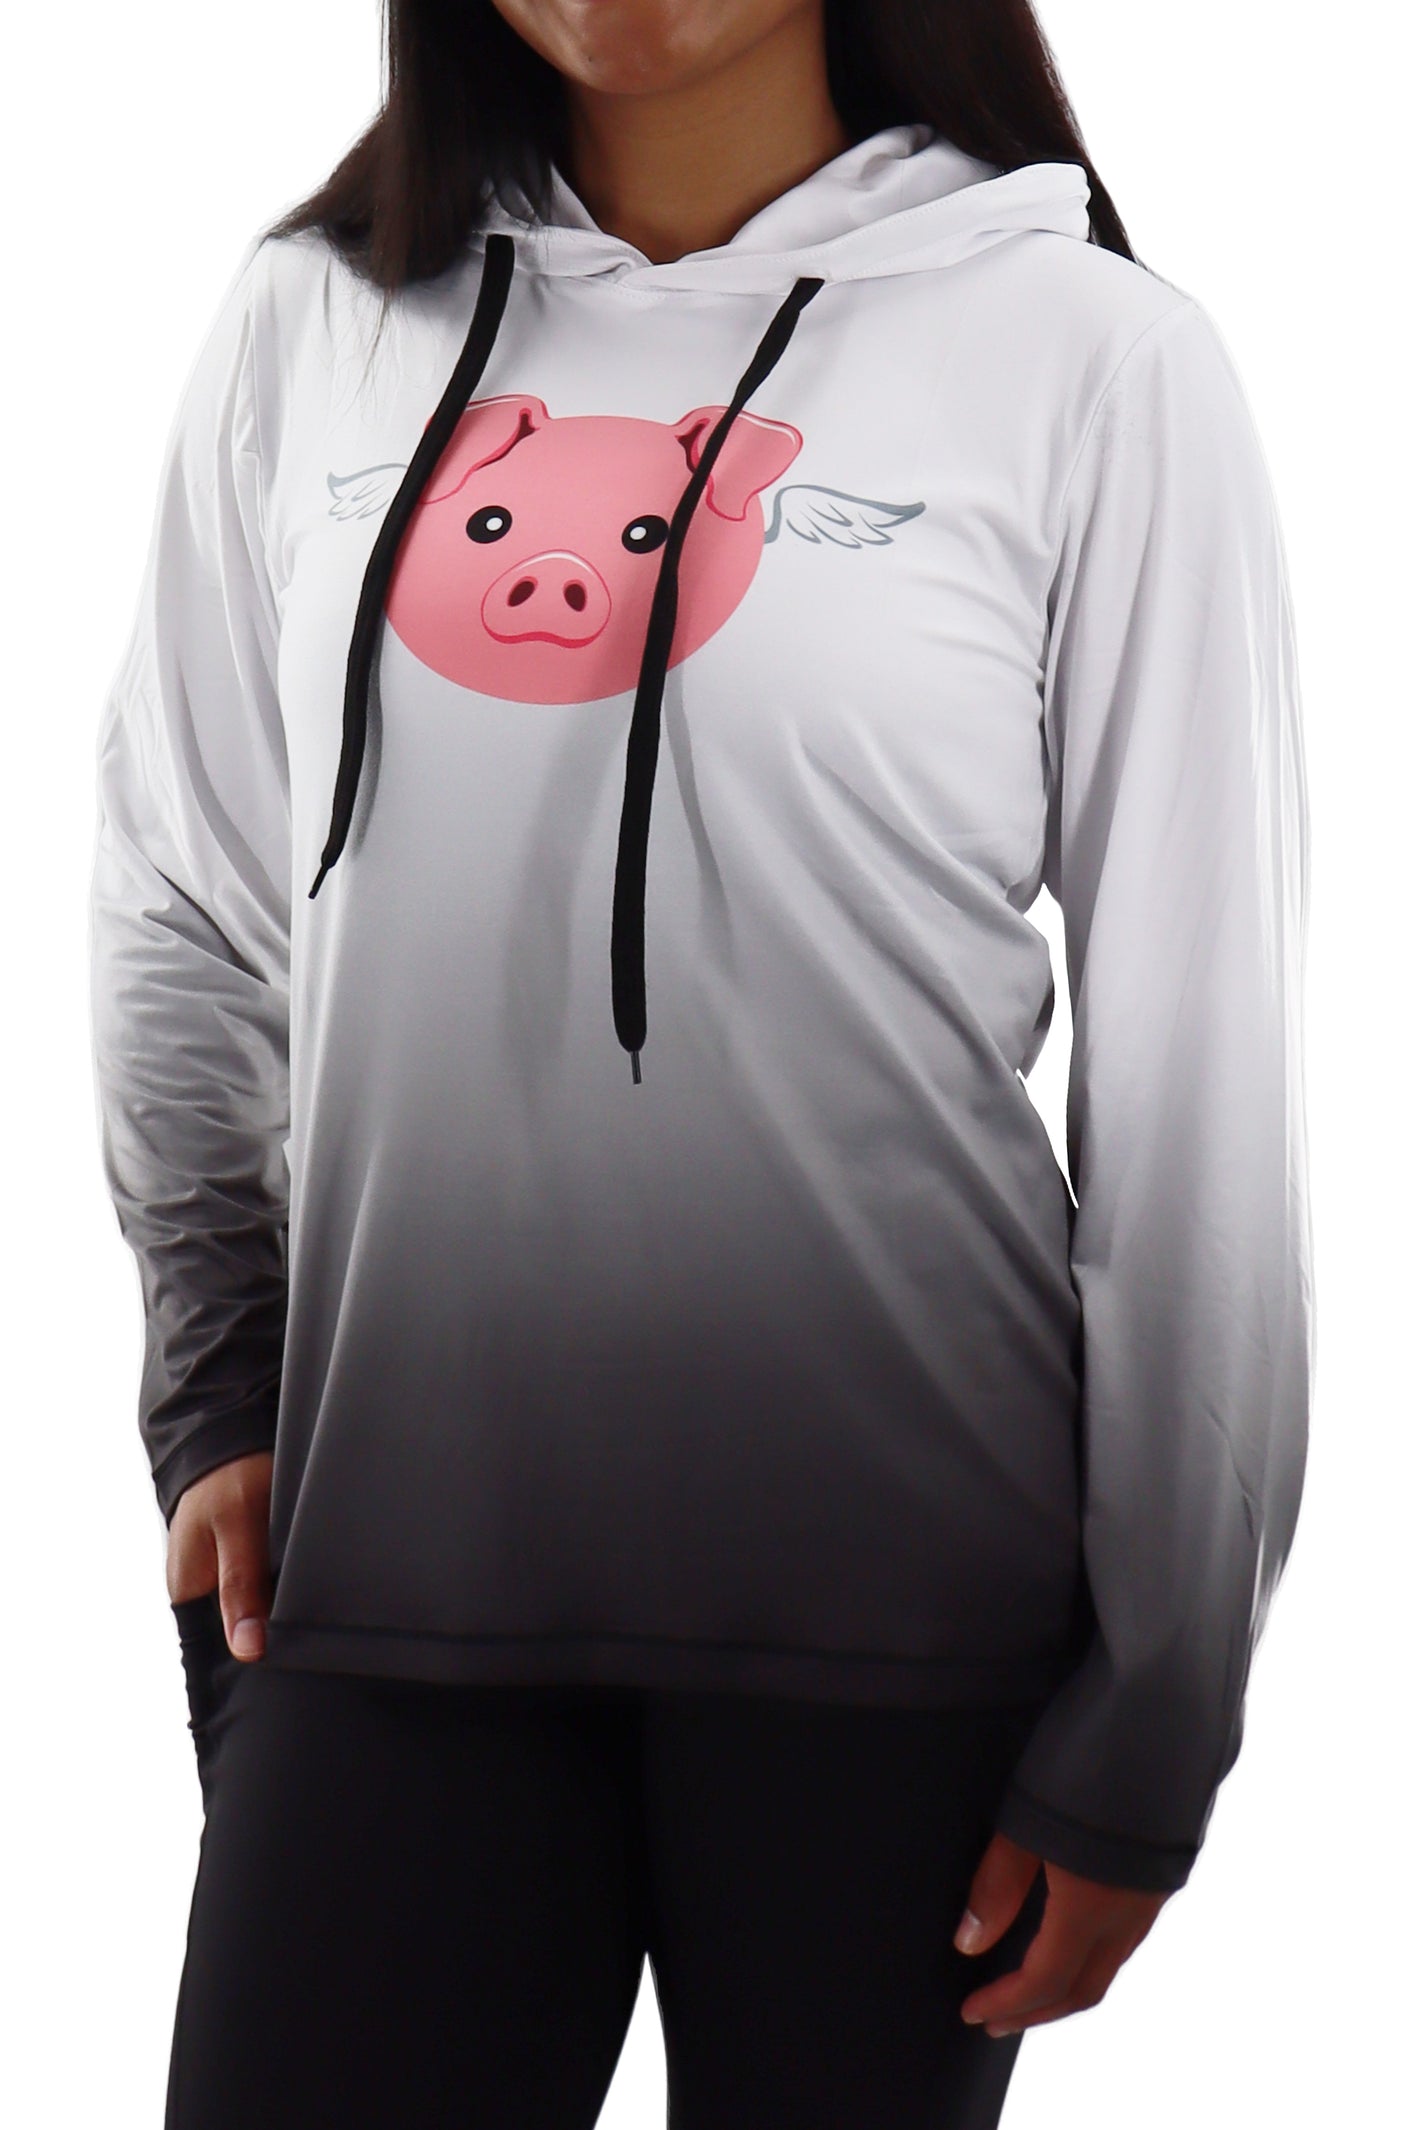 7201 - "When Pigs Fly" Womens Ombre Hoodie - Black & White